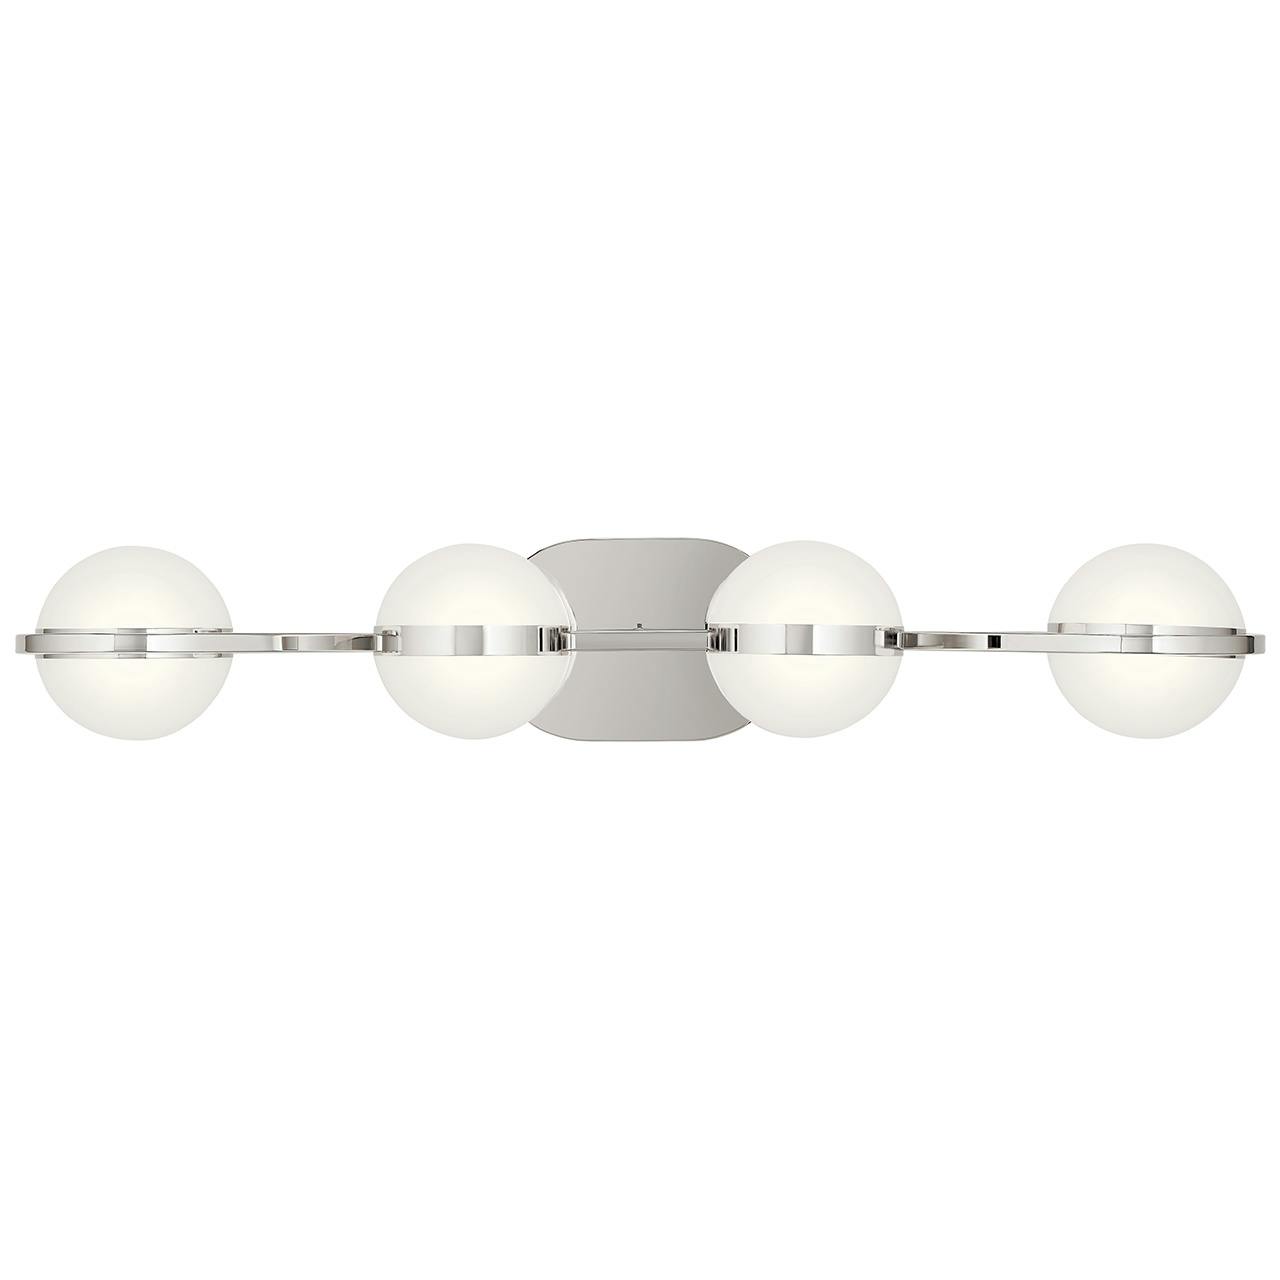 Product image of the 85093PN shown hung horizontally